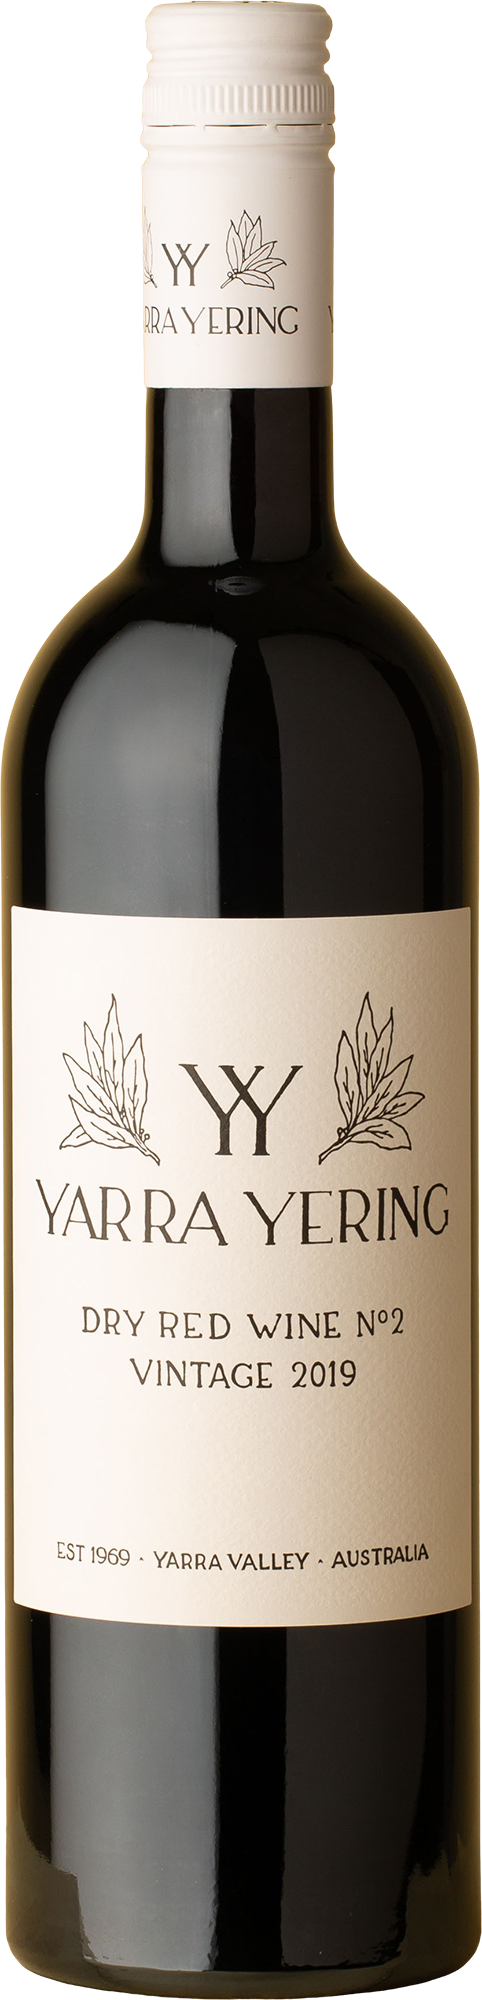 Yarra Yering - Dry Red No.2 Red Blend 2019 Red Wine